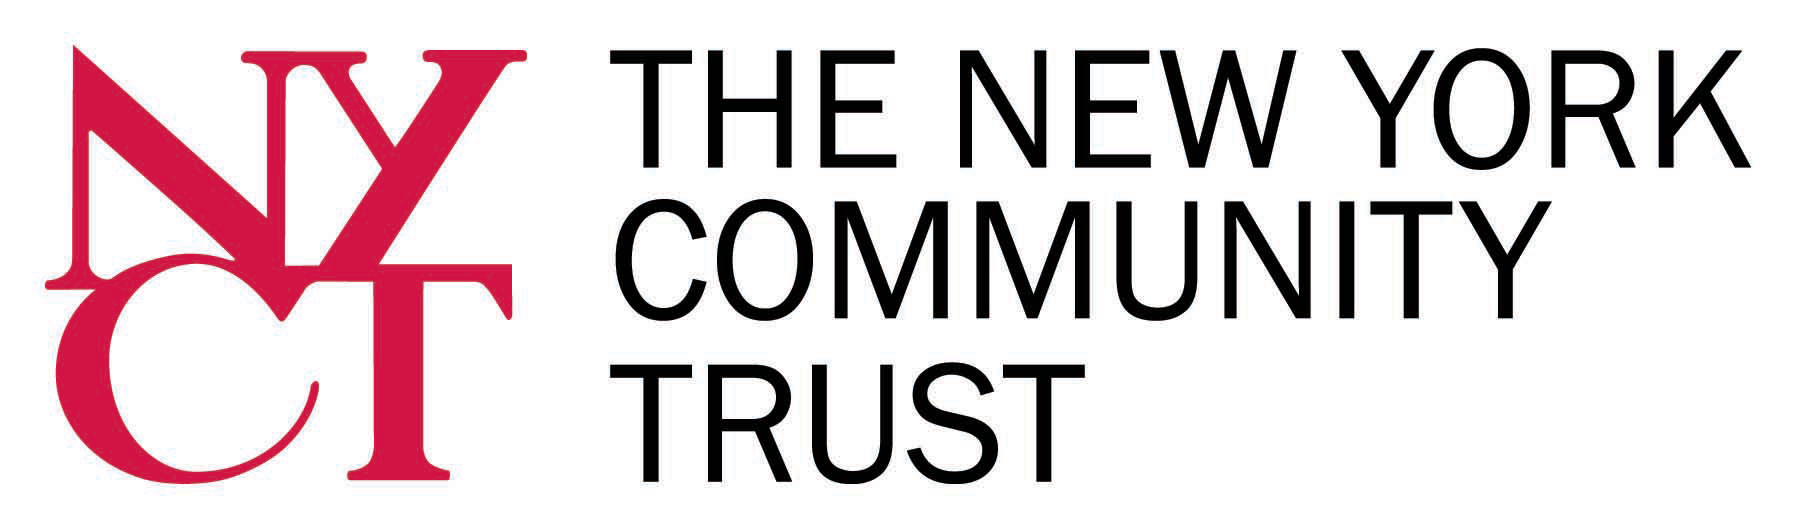 NYCommunityTrust.png